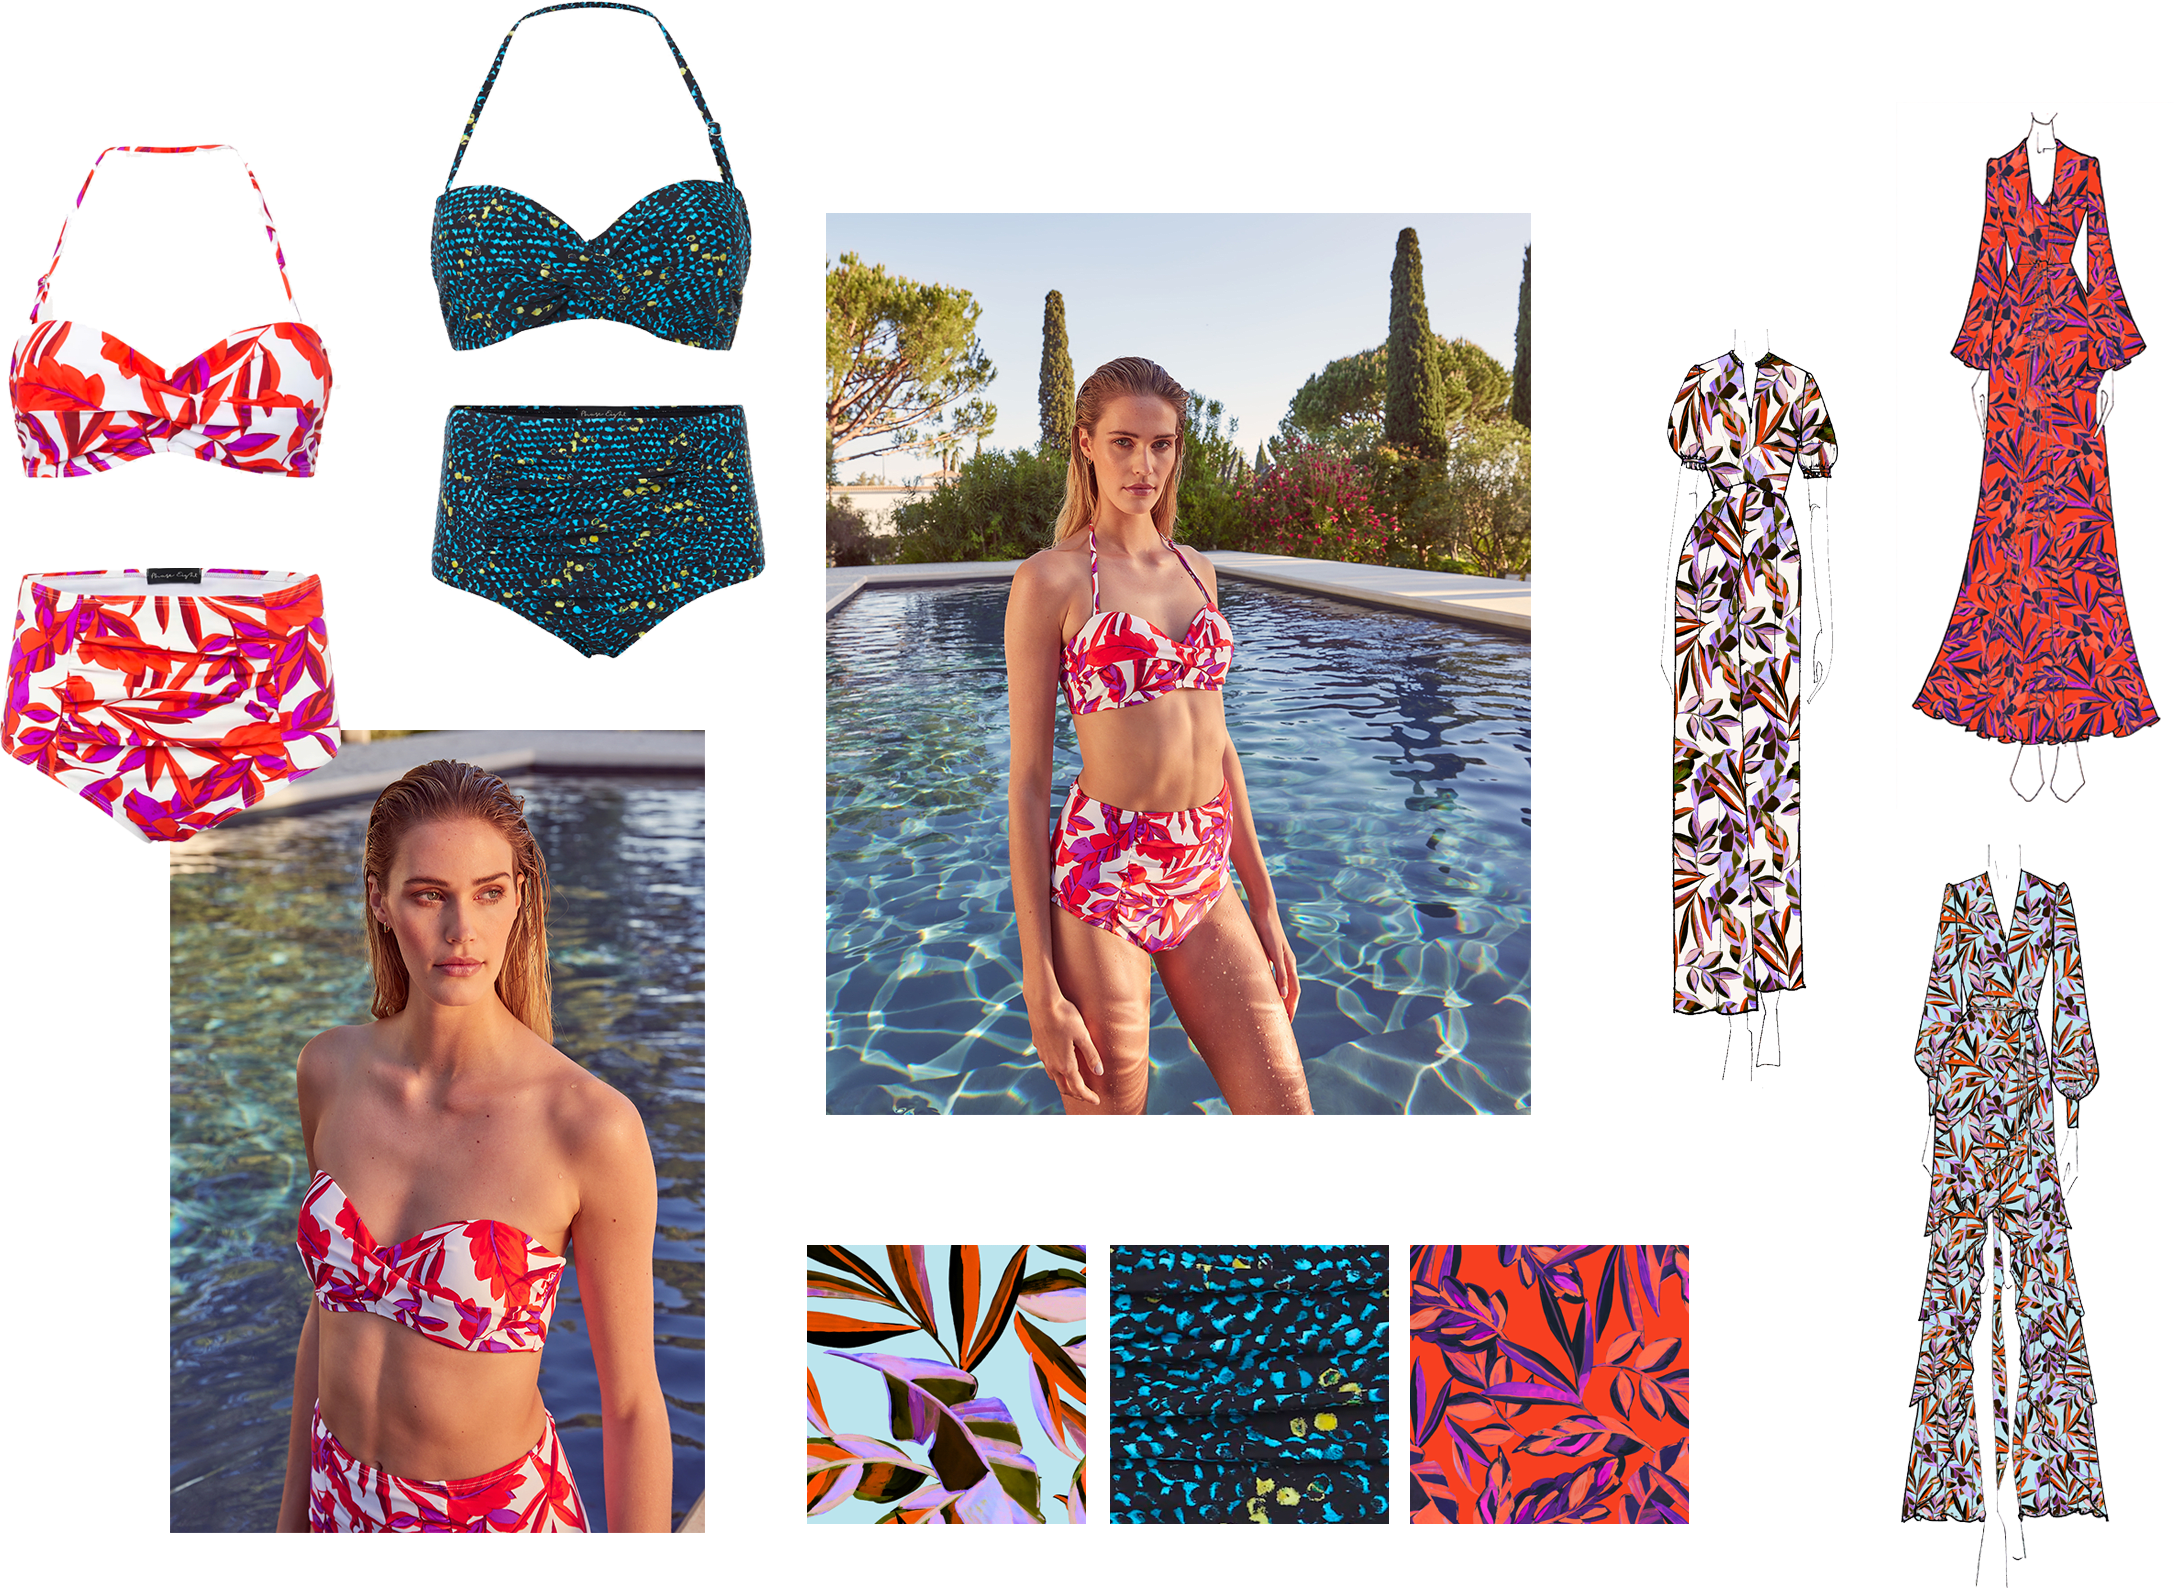 Moodboard of swimwear imagery, products and prints